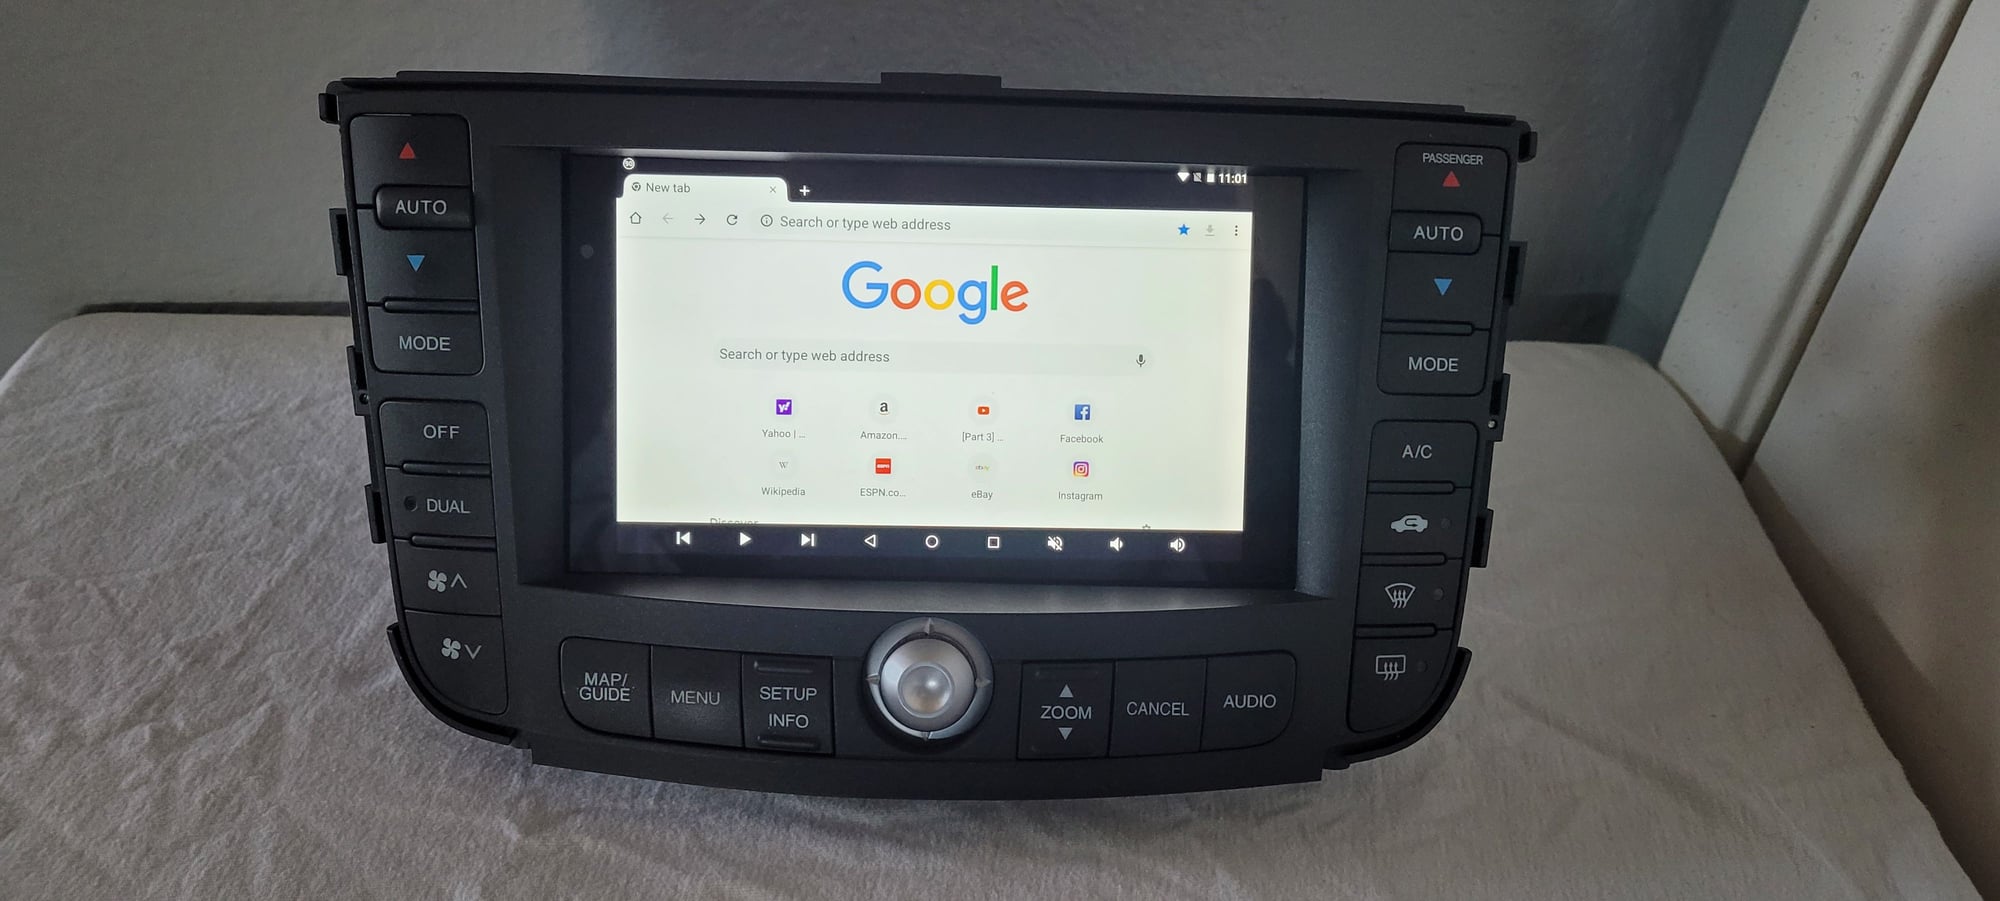 Audio Video/Electronics - FS: Nexus 7 tablet 3G TL - Used - 2004 to 2008 Acura TL - Norwalk, CA 90650, United States